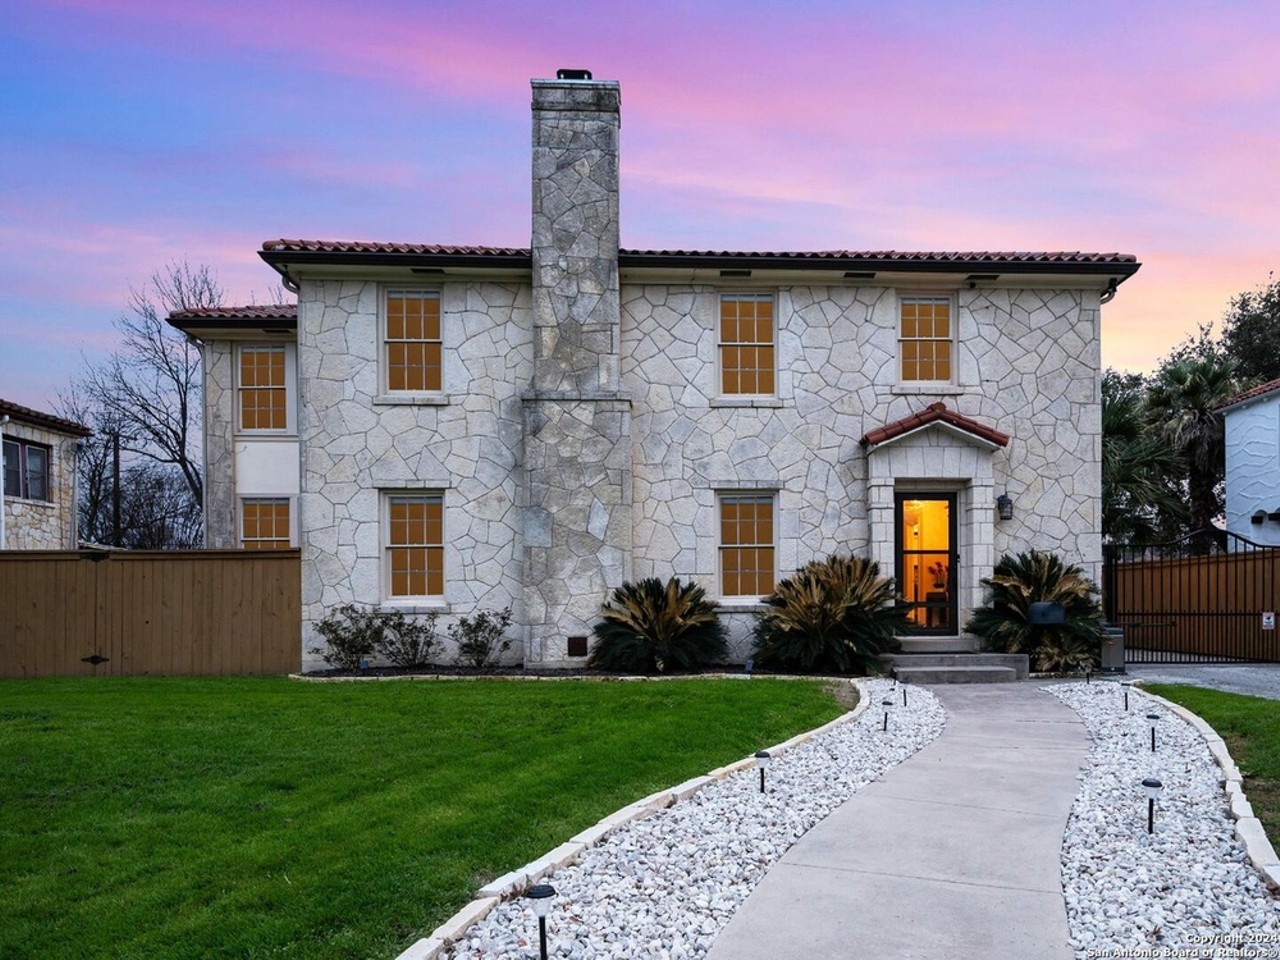 This historic home in San Antonio's Monticello Park is for sale after a two-year makeover